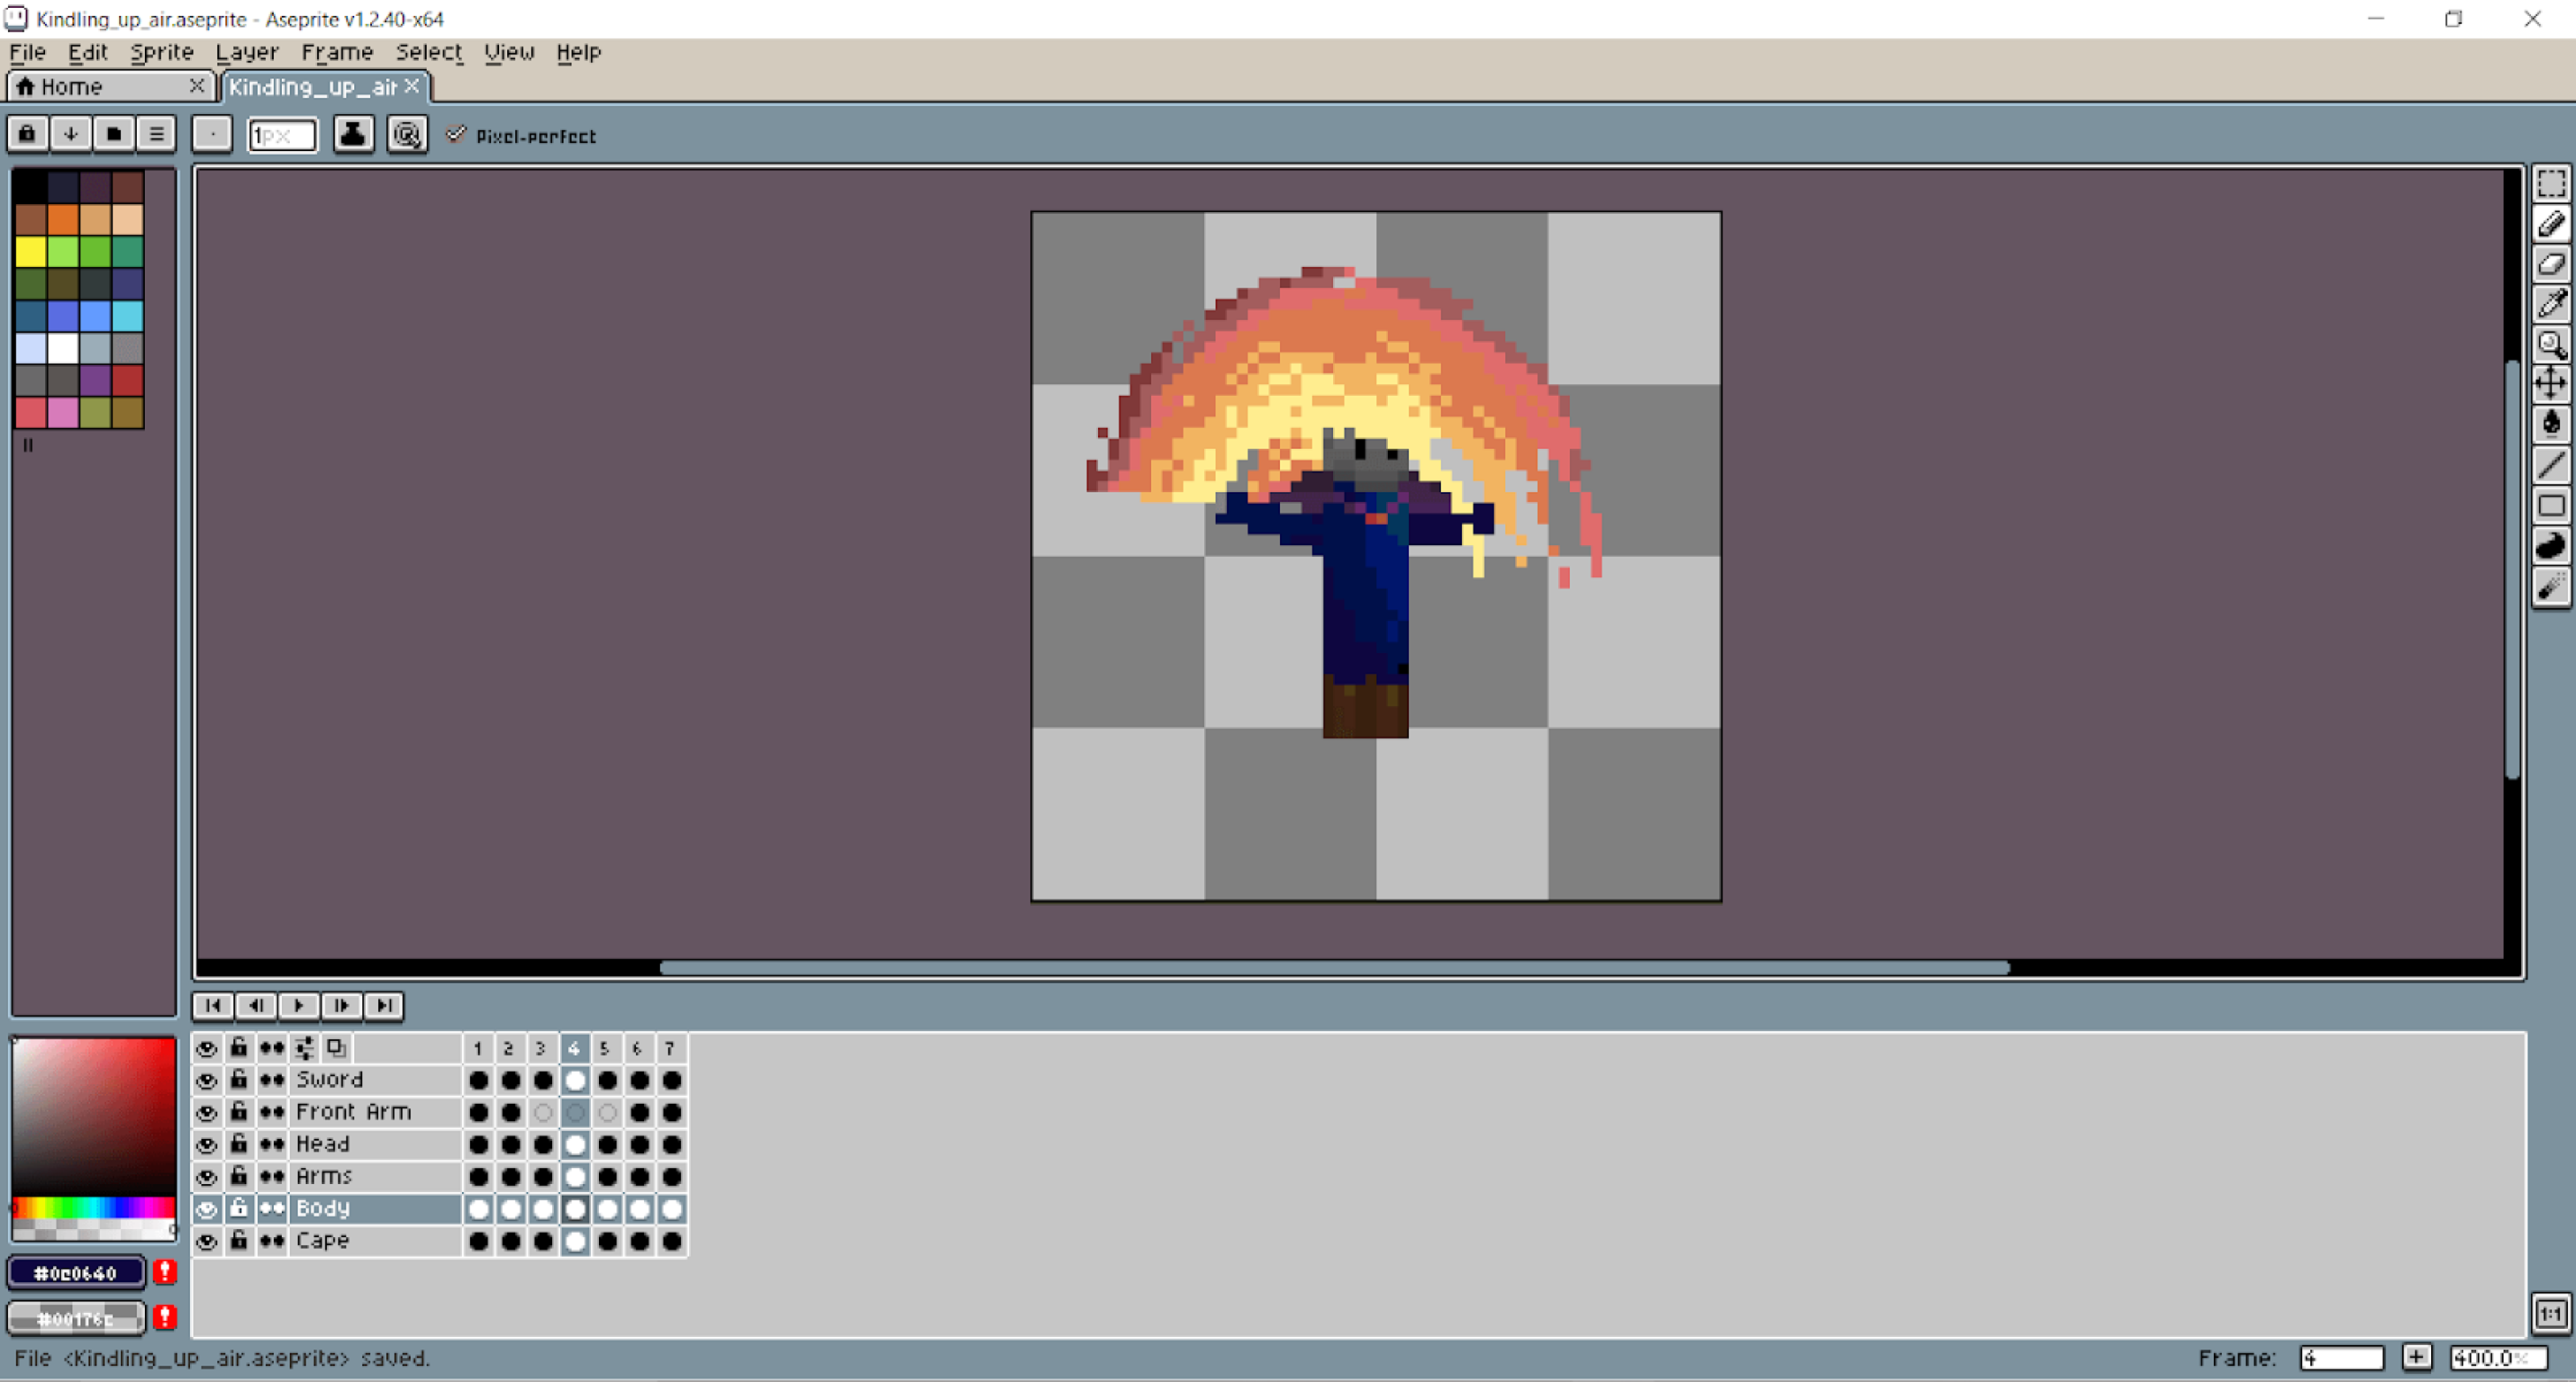 Early version of an active keyframe in the Kindling’s Up Aerial attack animation in Aseprite.